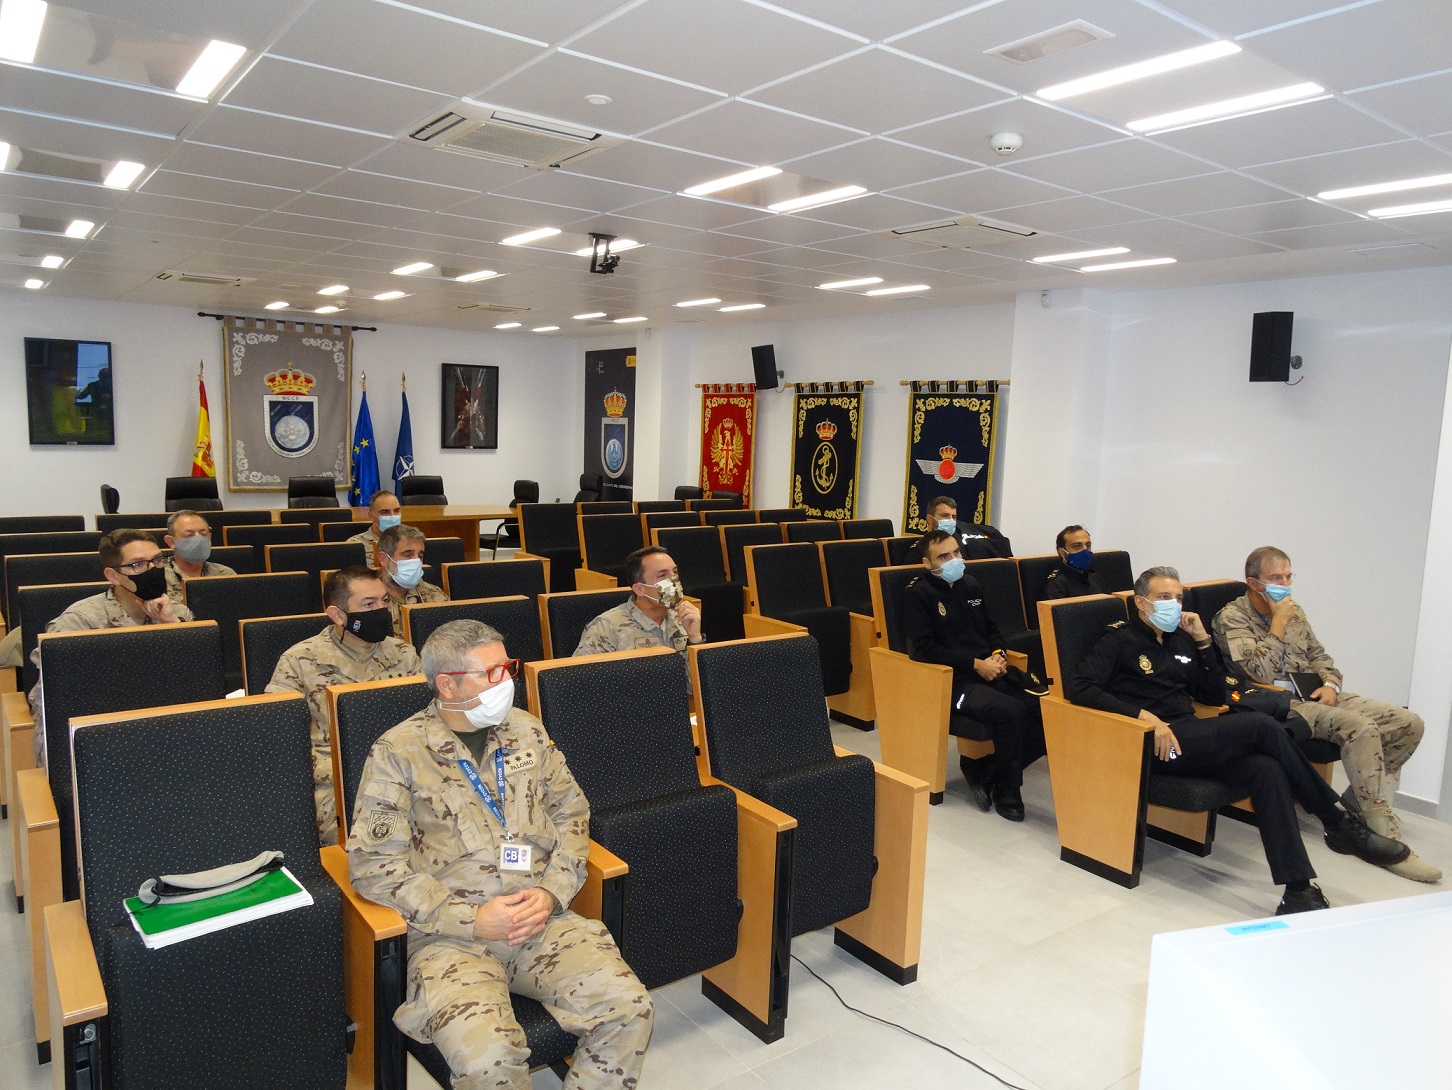 Personnel from both units during the conference